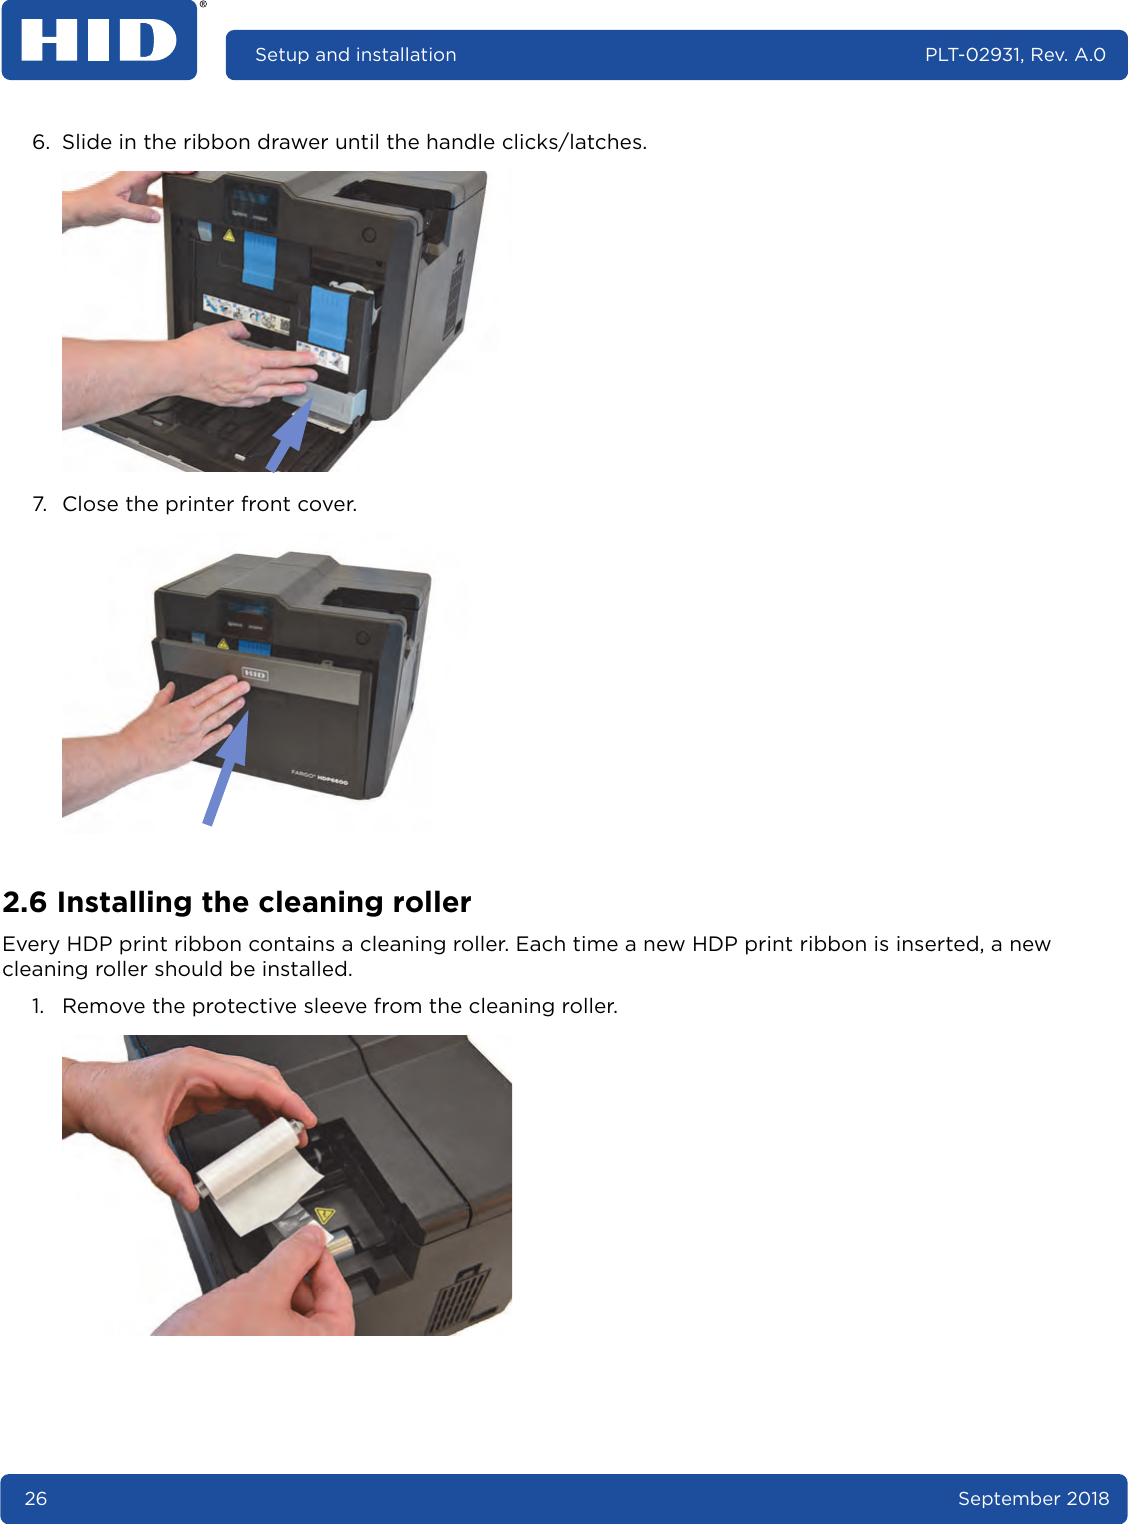 26 September 2018Setup and installation PLT-02931, Rev. A.06. Slide in the ribbon drawer until the handle clicks/latches. 7. Close the printer front cover. 2.6 Installing the cleaning rollerEvery HDP print ribbon contains a cleaning roller. Each time a new HDP print ribbon is inserted, a new cleaning roller should be installed.1. Remove the protective sleeve from the cleaning roller. 